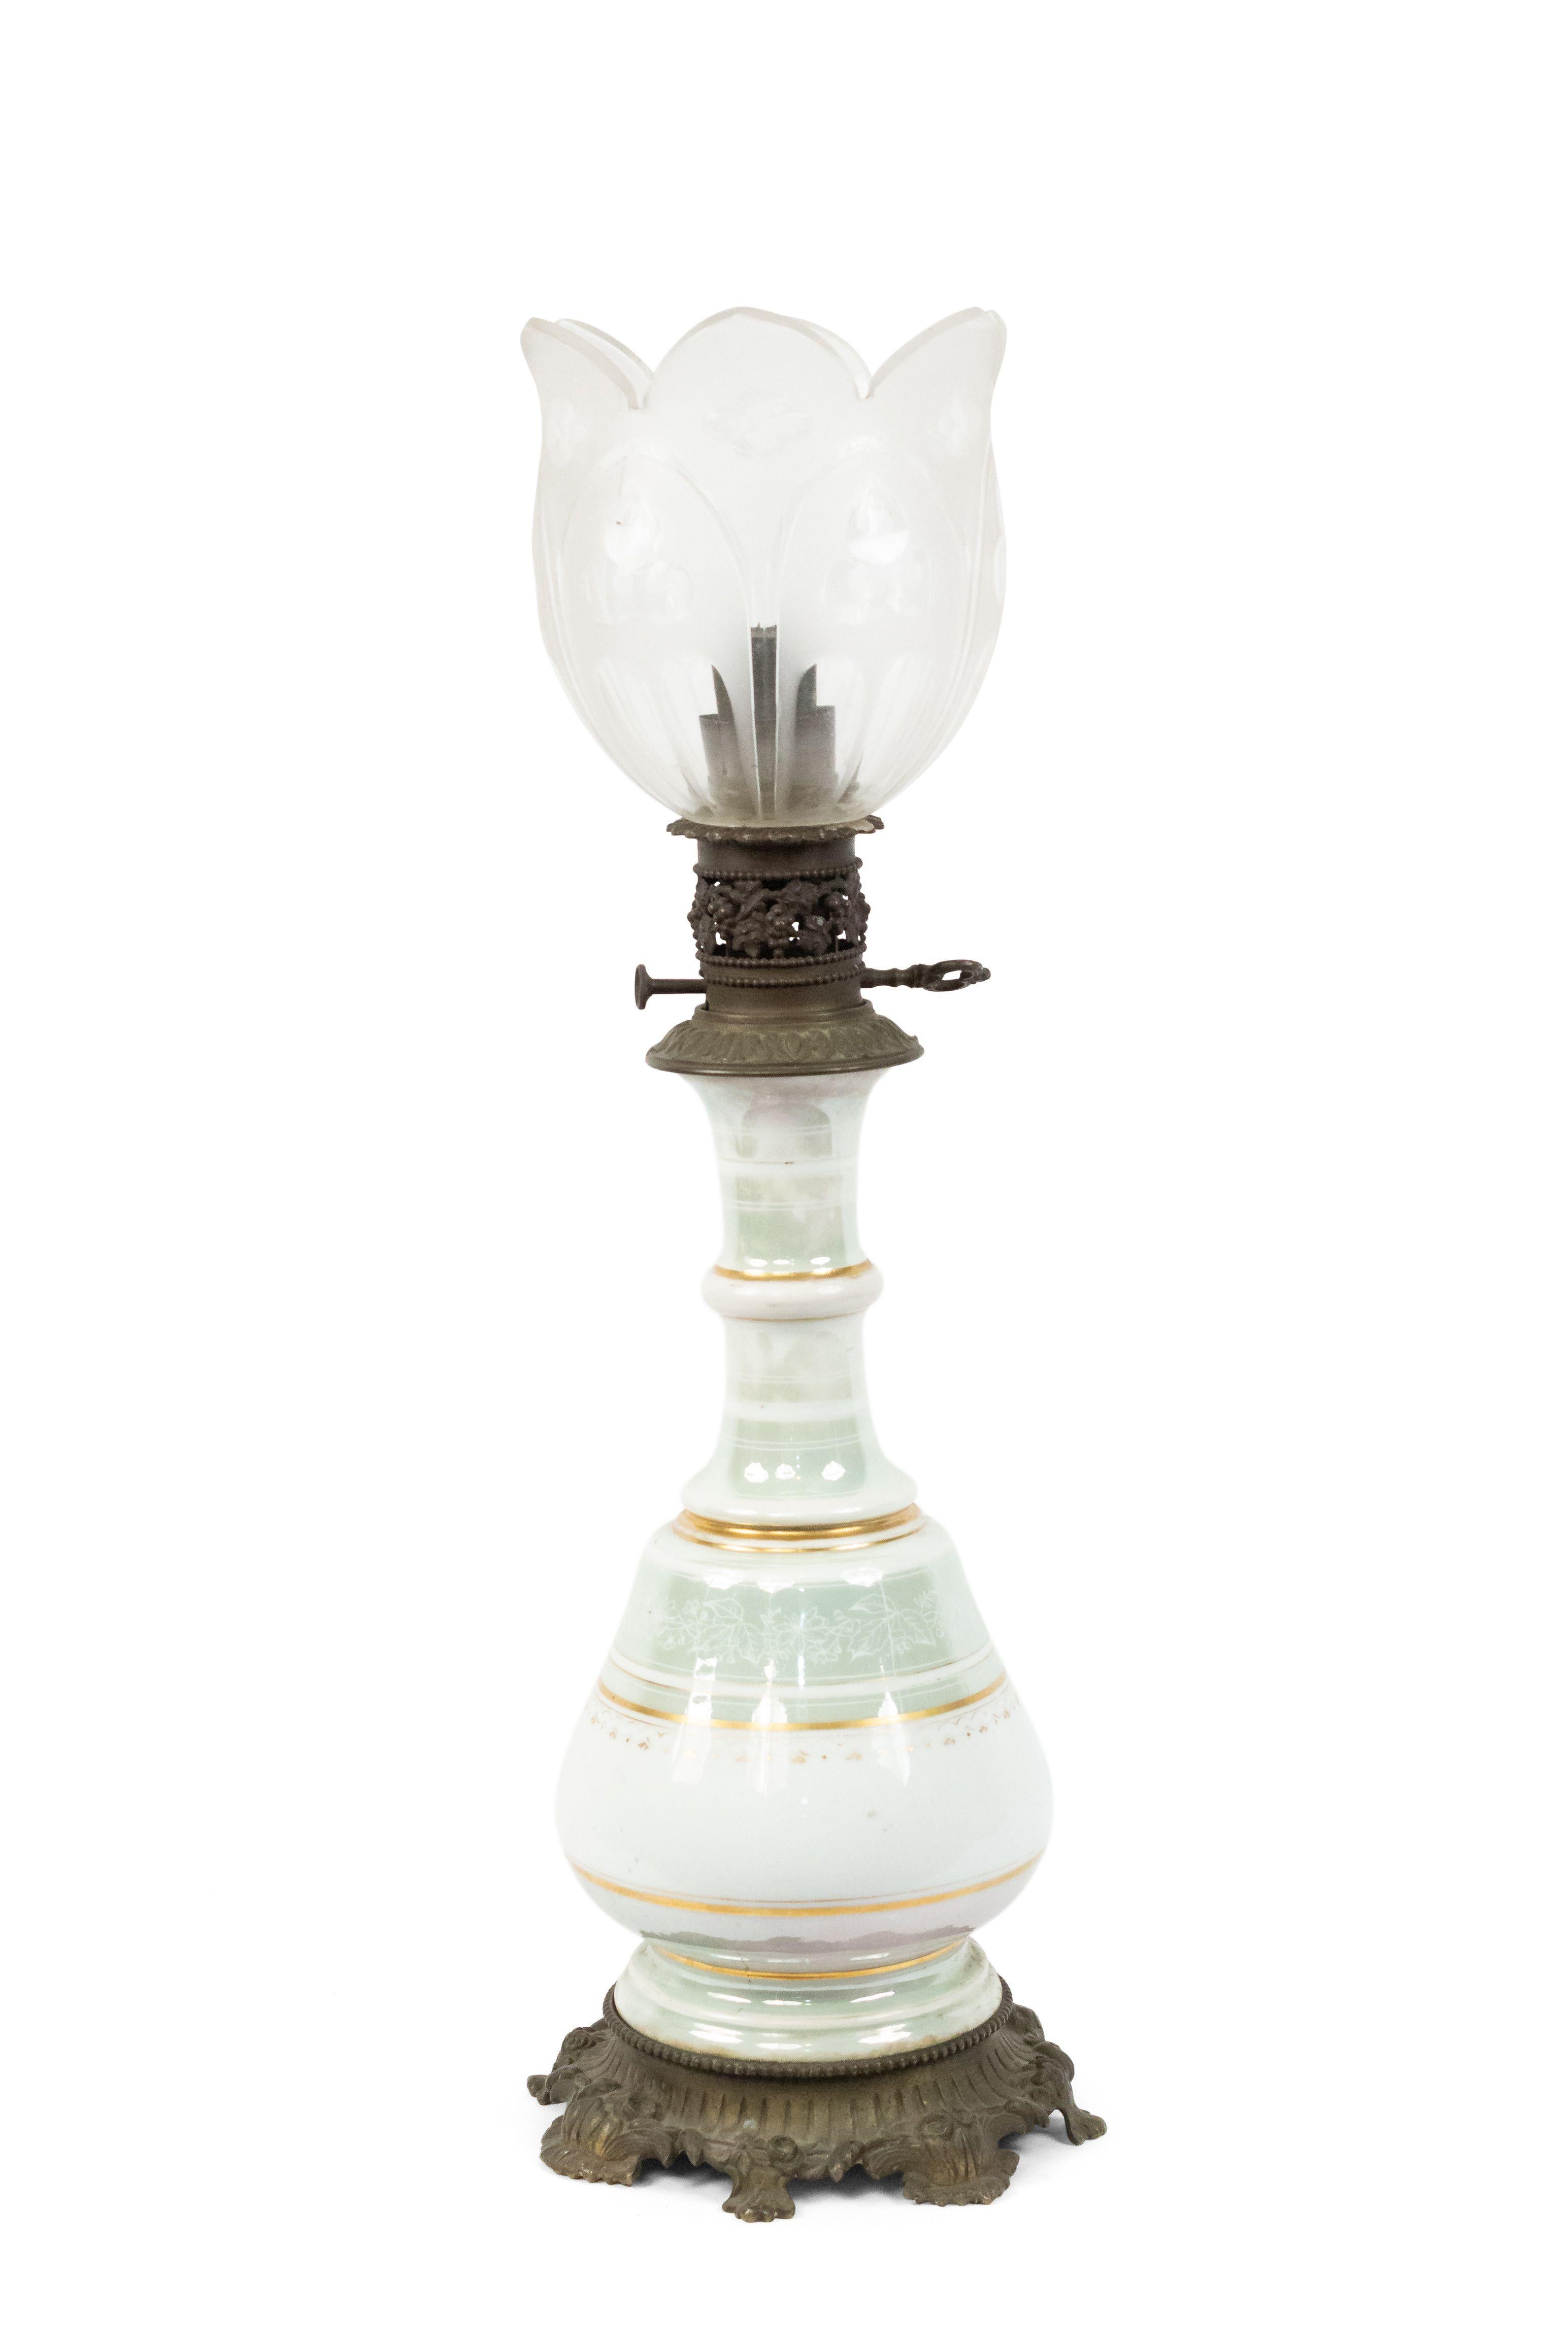 Pair of French Victorian celadon and white porcelain oil lamps with etched glass shade and bronze base (PRICED AS Pair).
